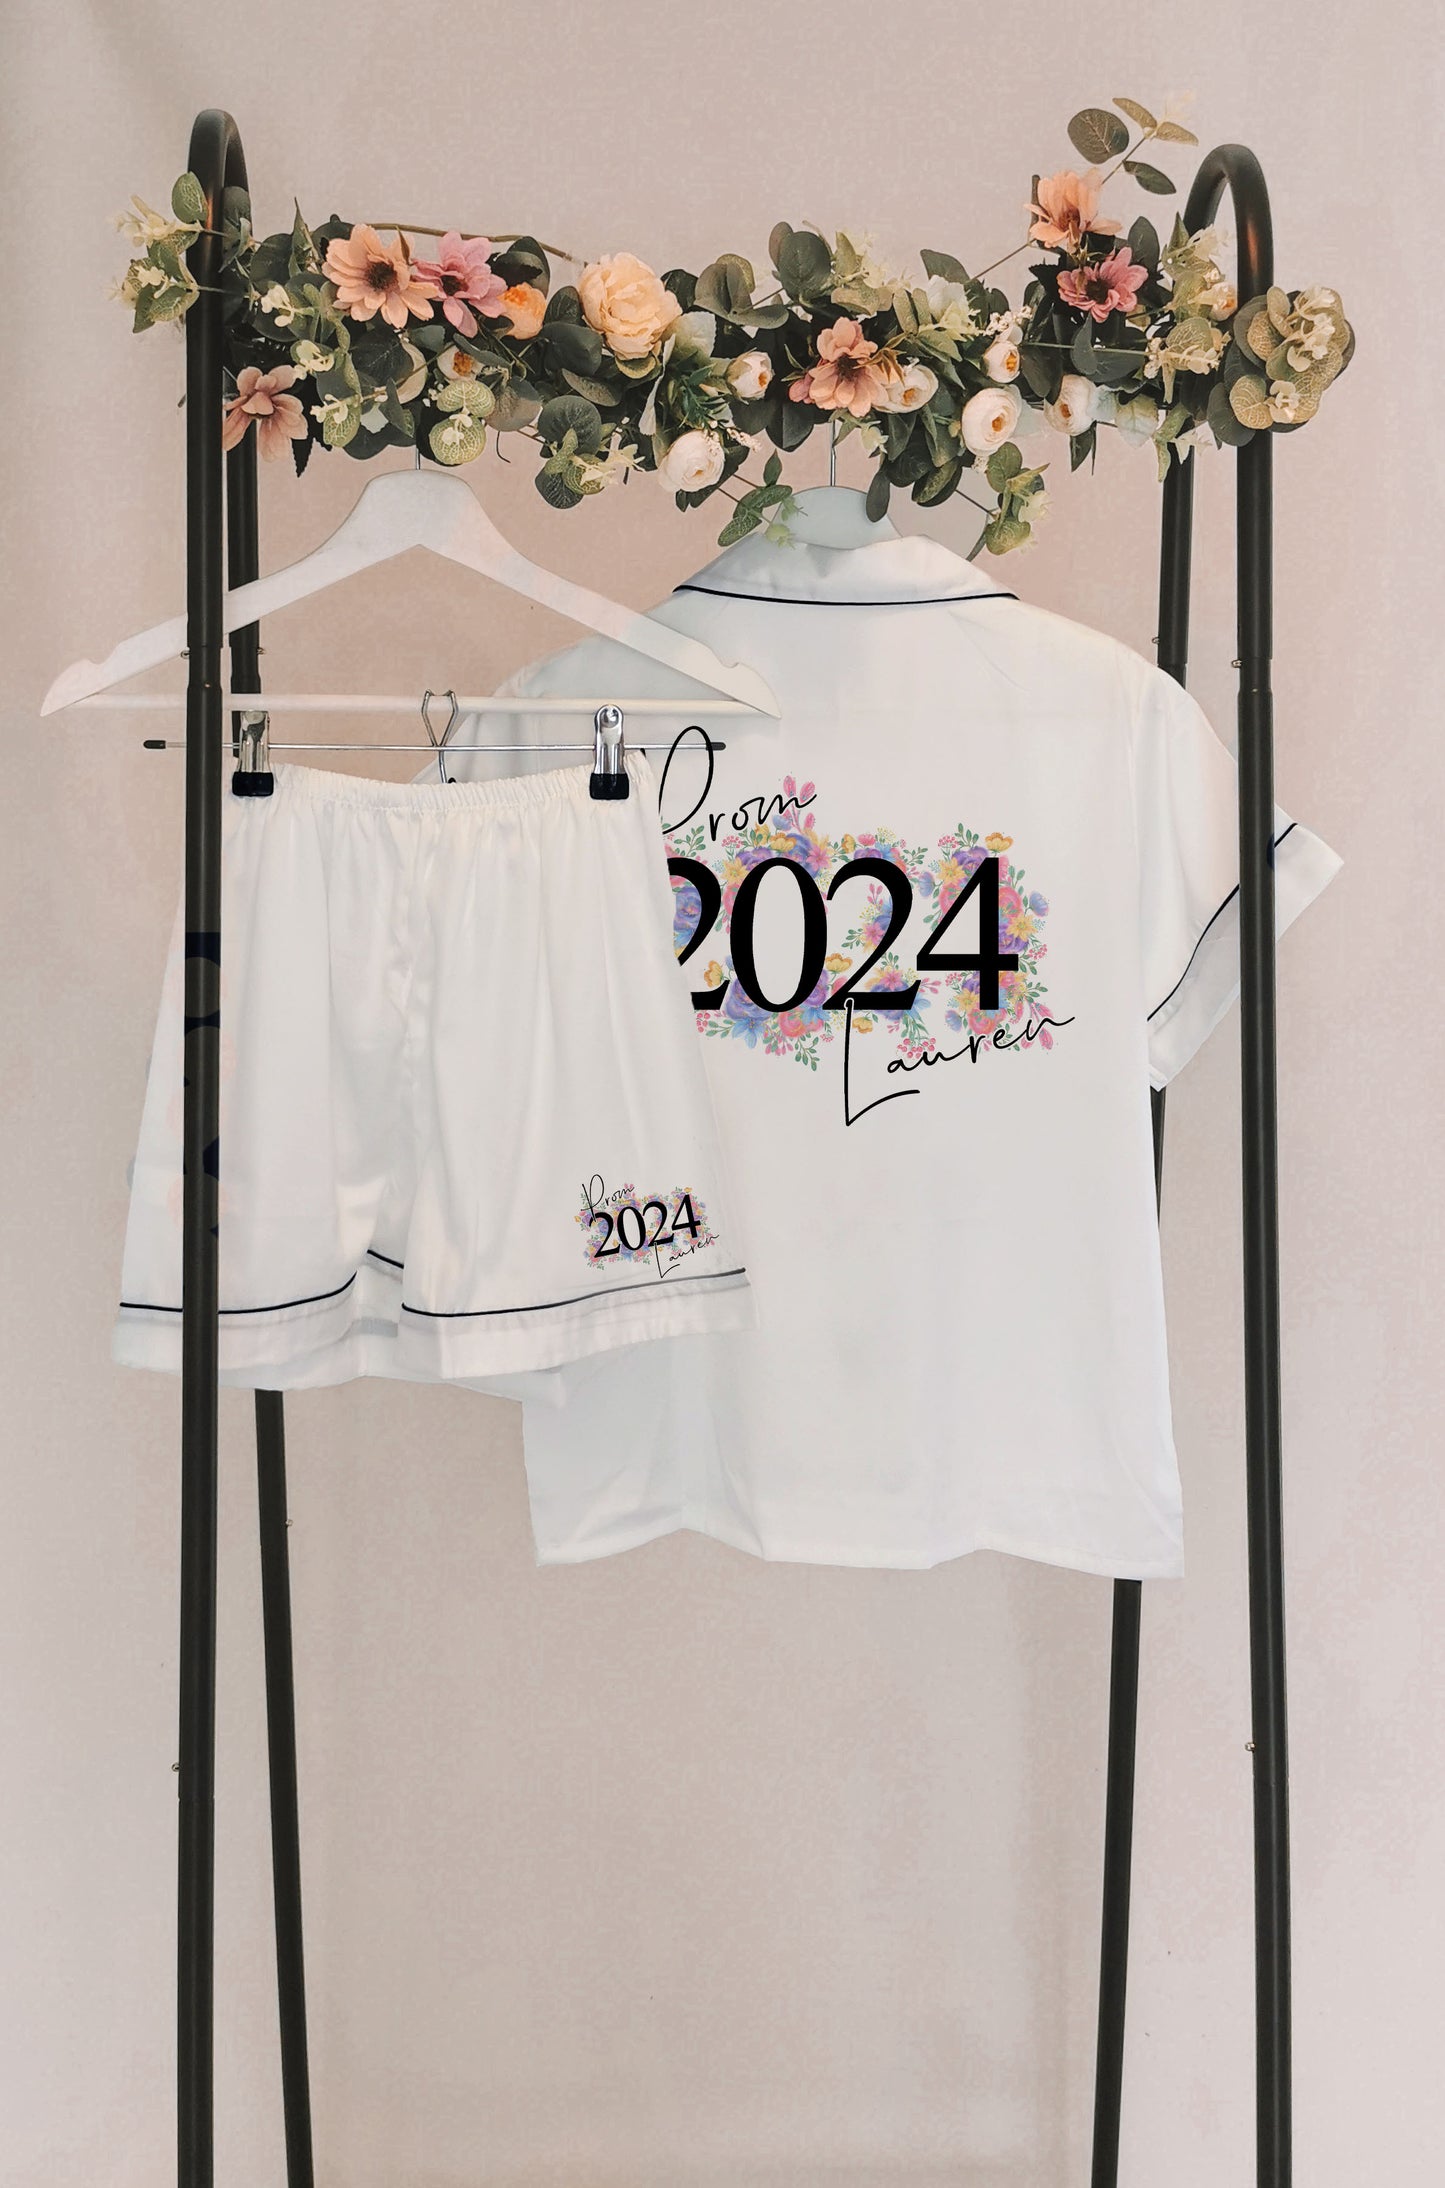 Personalised Prom 2024 Pyjamas and Robes